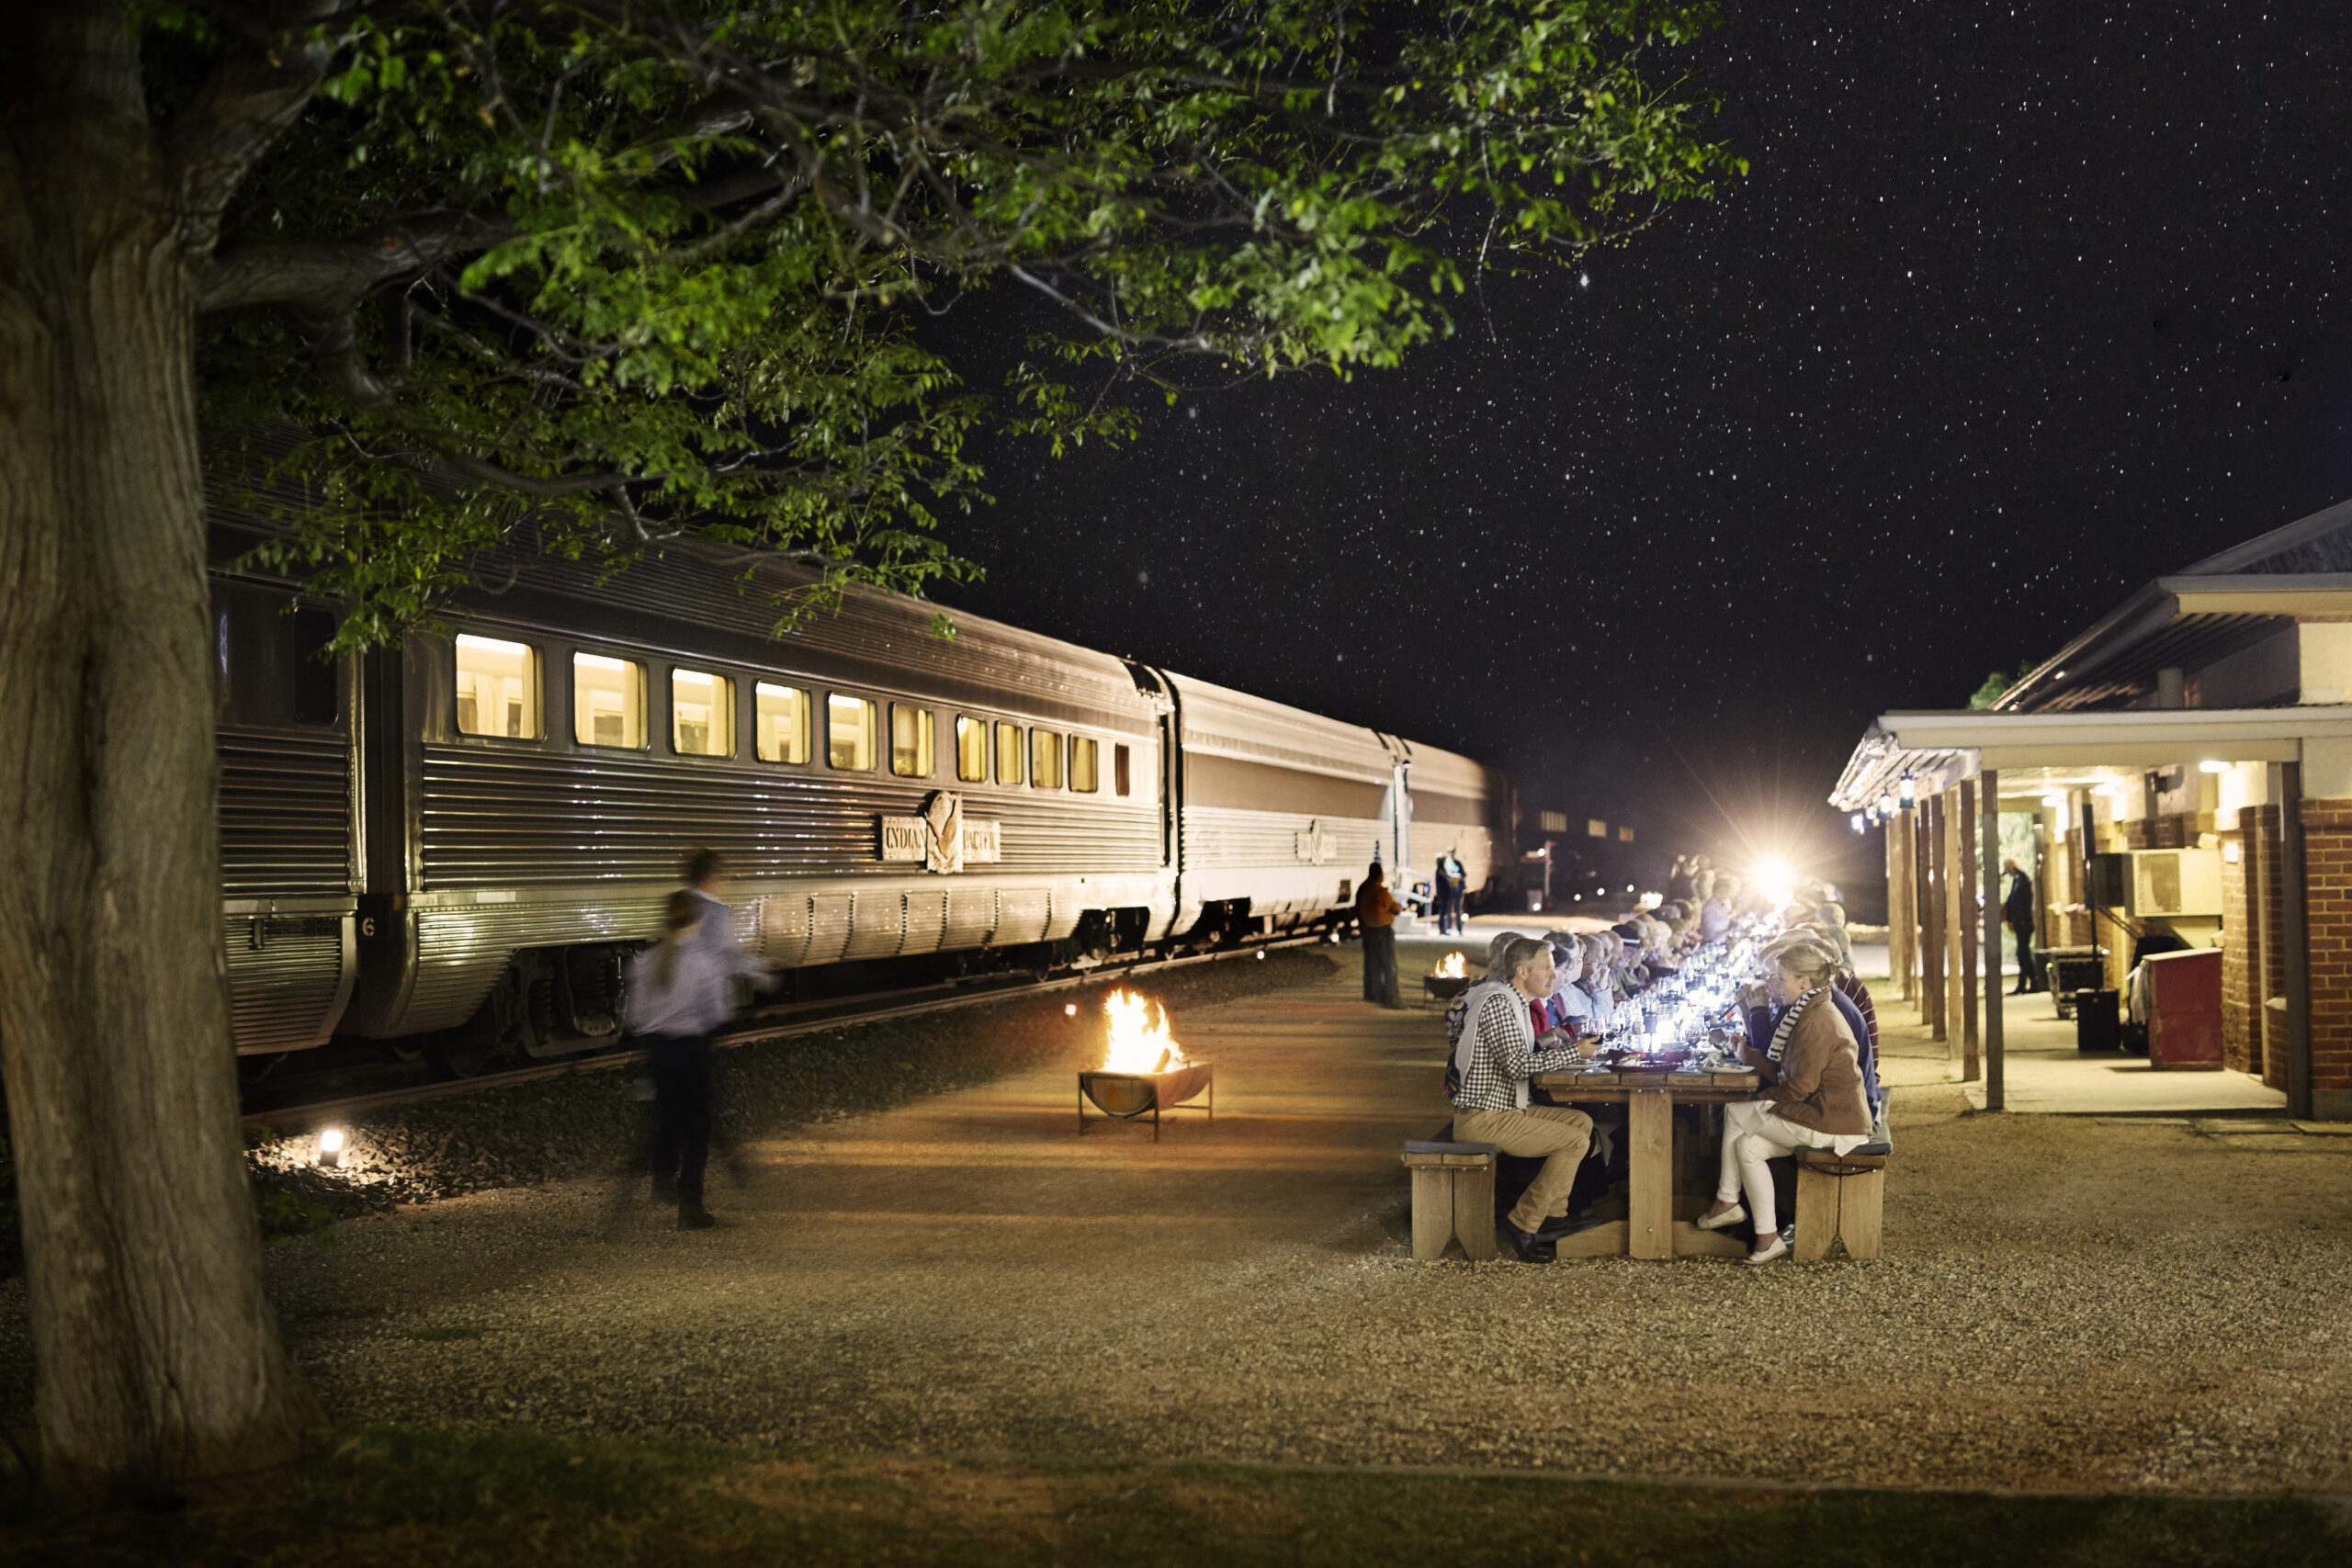 People dining next to train at night under the stars with a fire pit